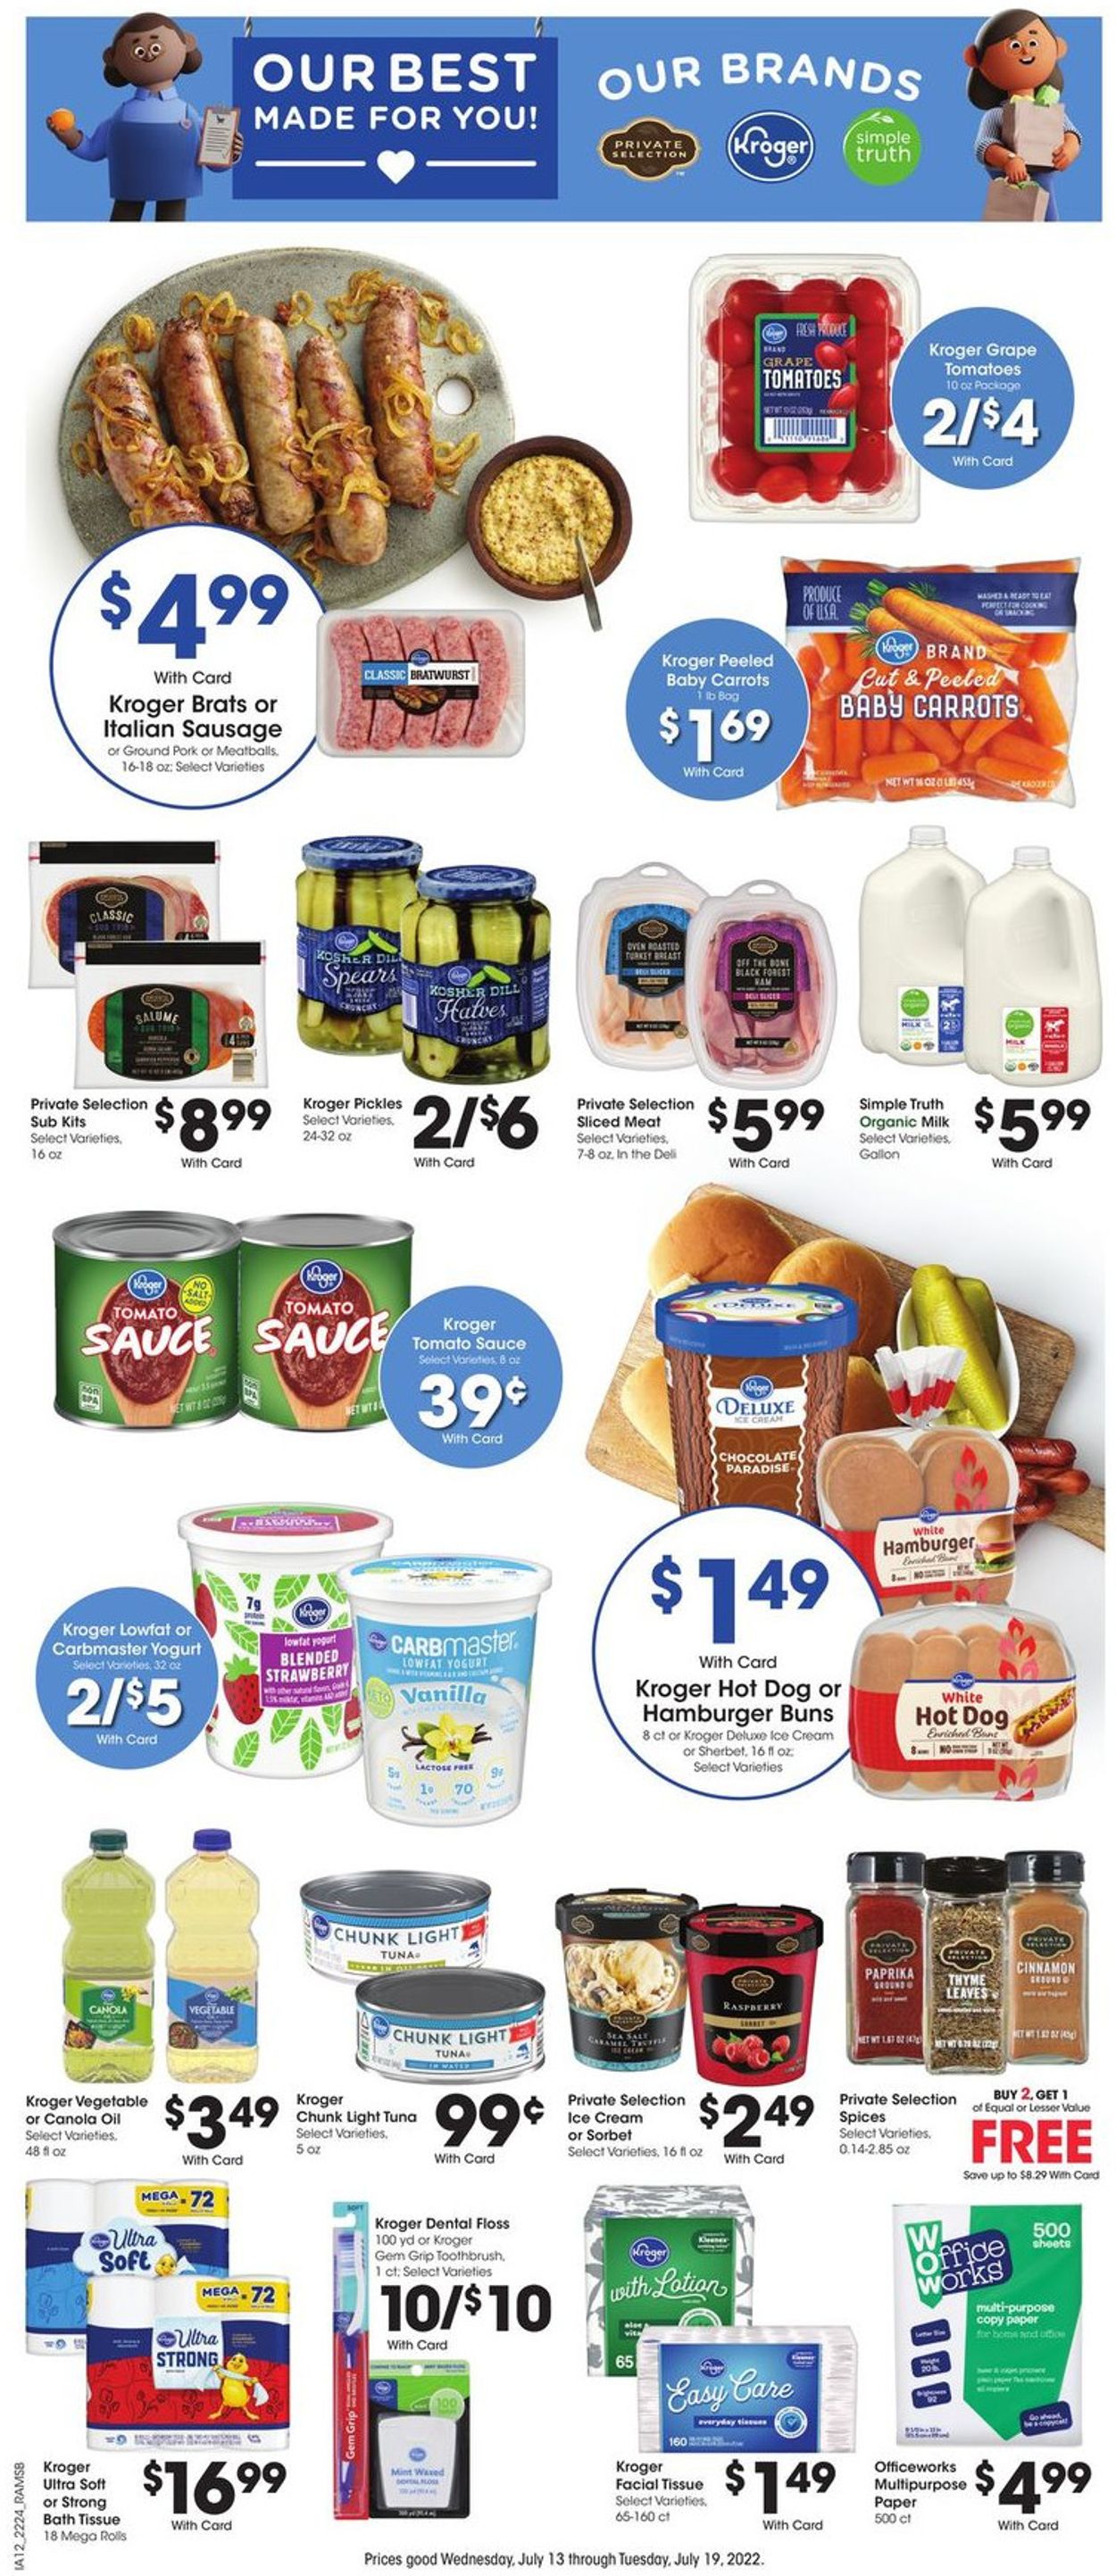 Catalogue Ralphs from 07/13/2022